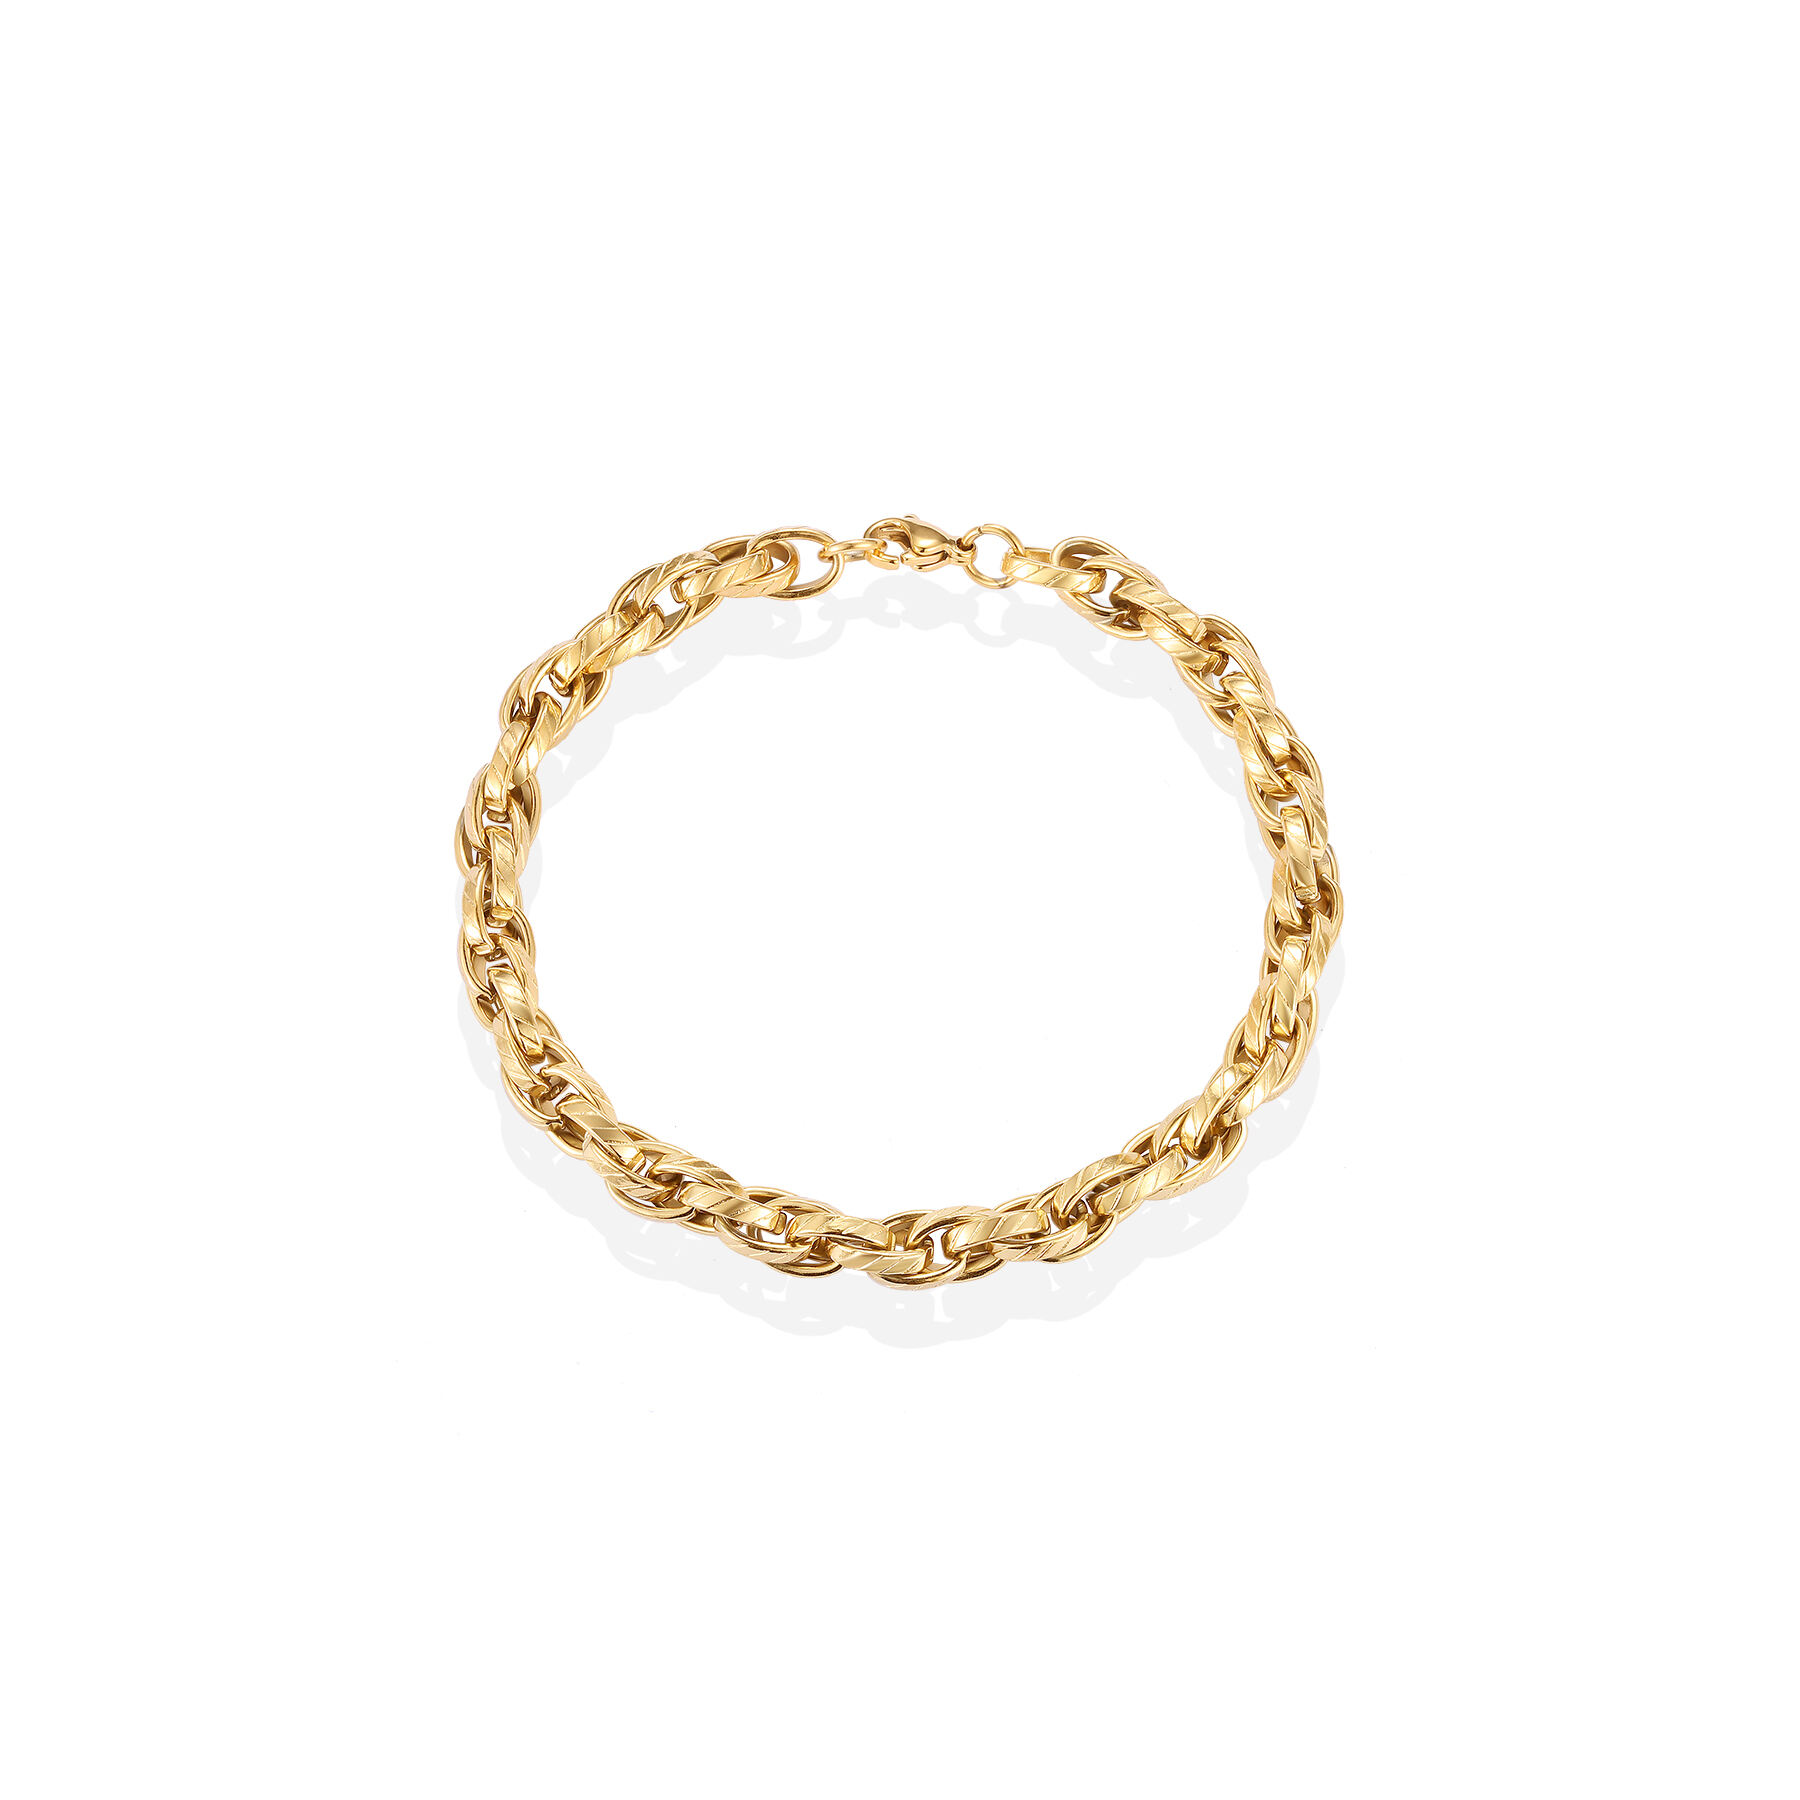 Multi-layer Twill oval shape chain bracelet with 18k gold plating